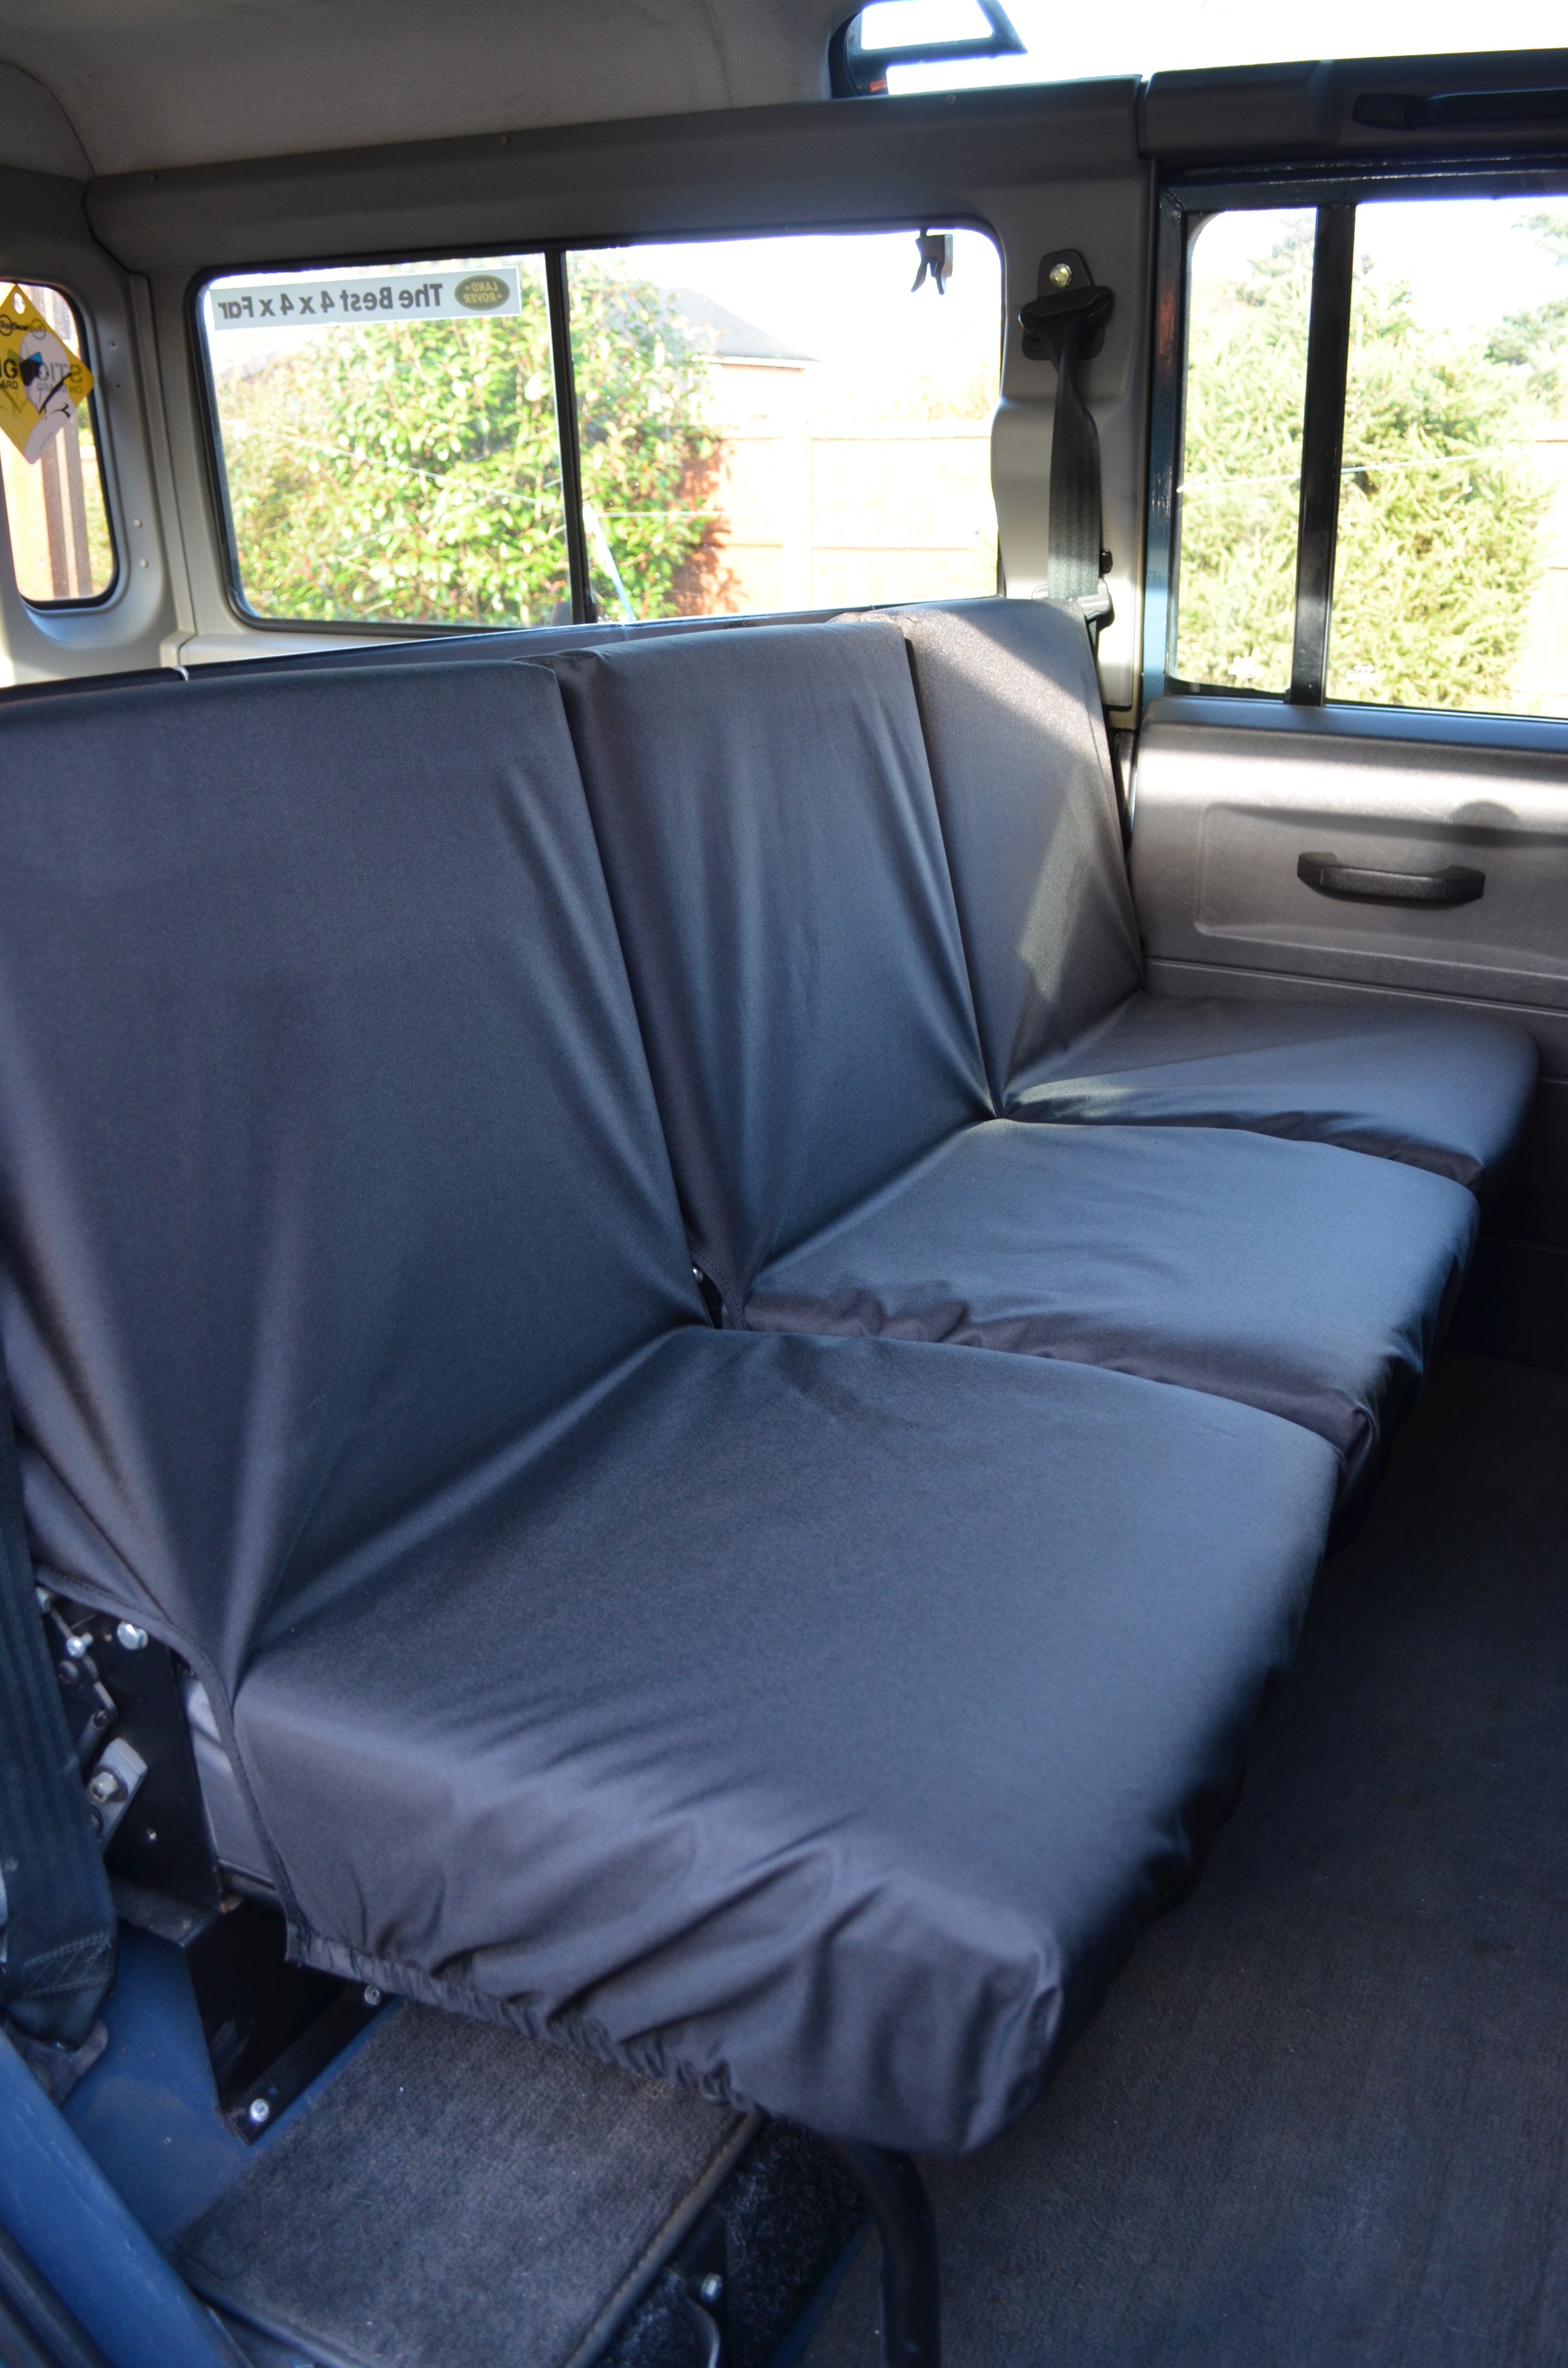 Land Rover Defender 1983 - 2007 Rear Seat Covers 2nd Row 3 Singles / Black Turtle Covers Ltd